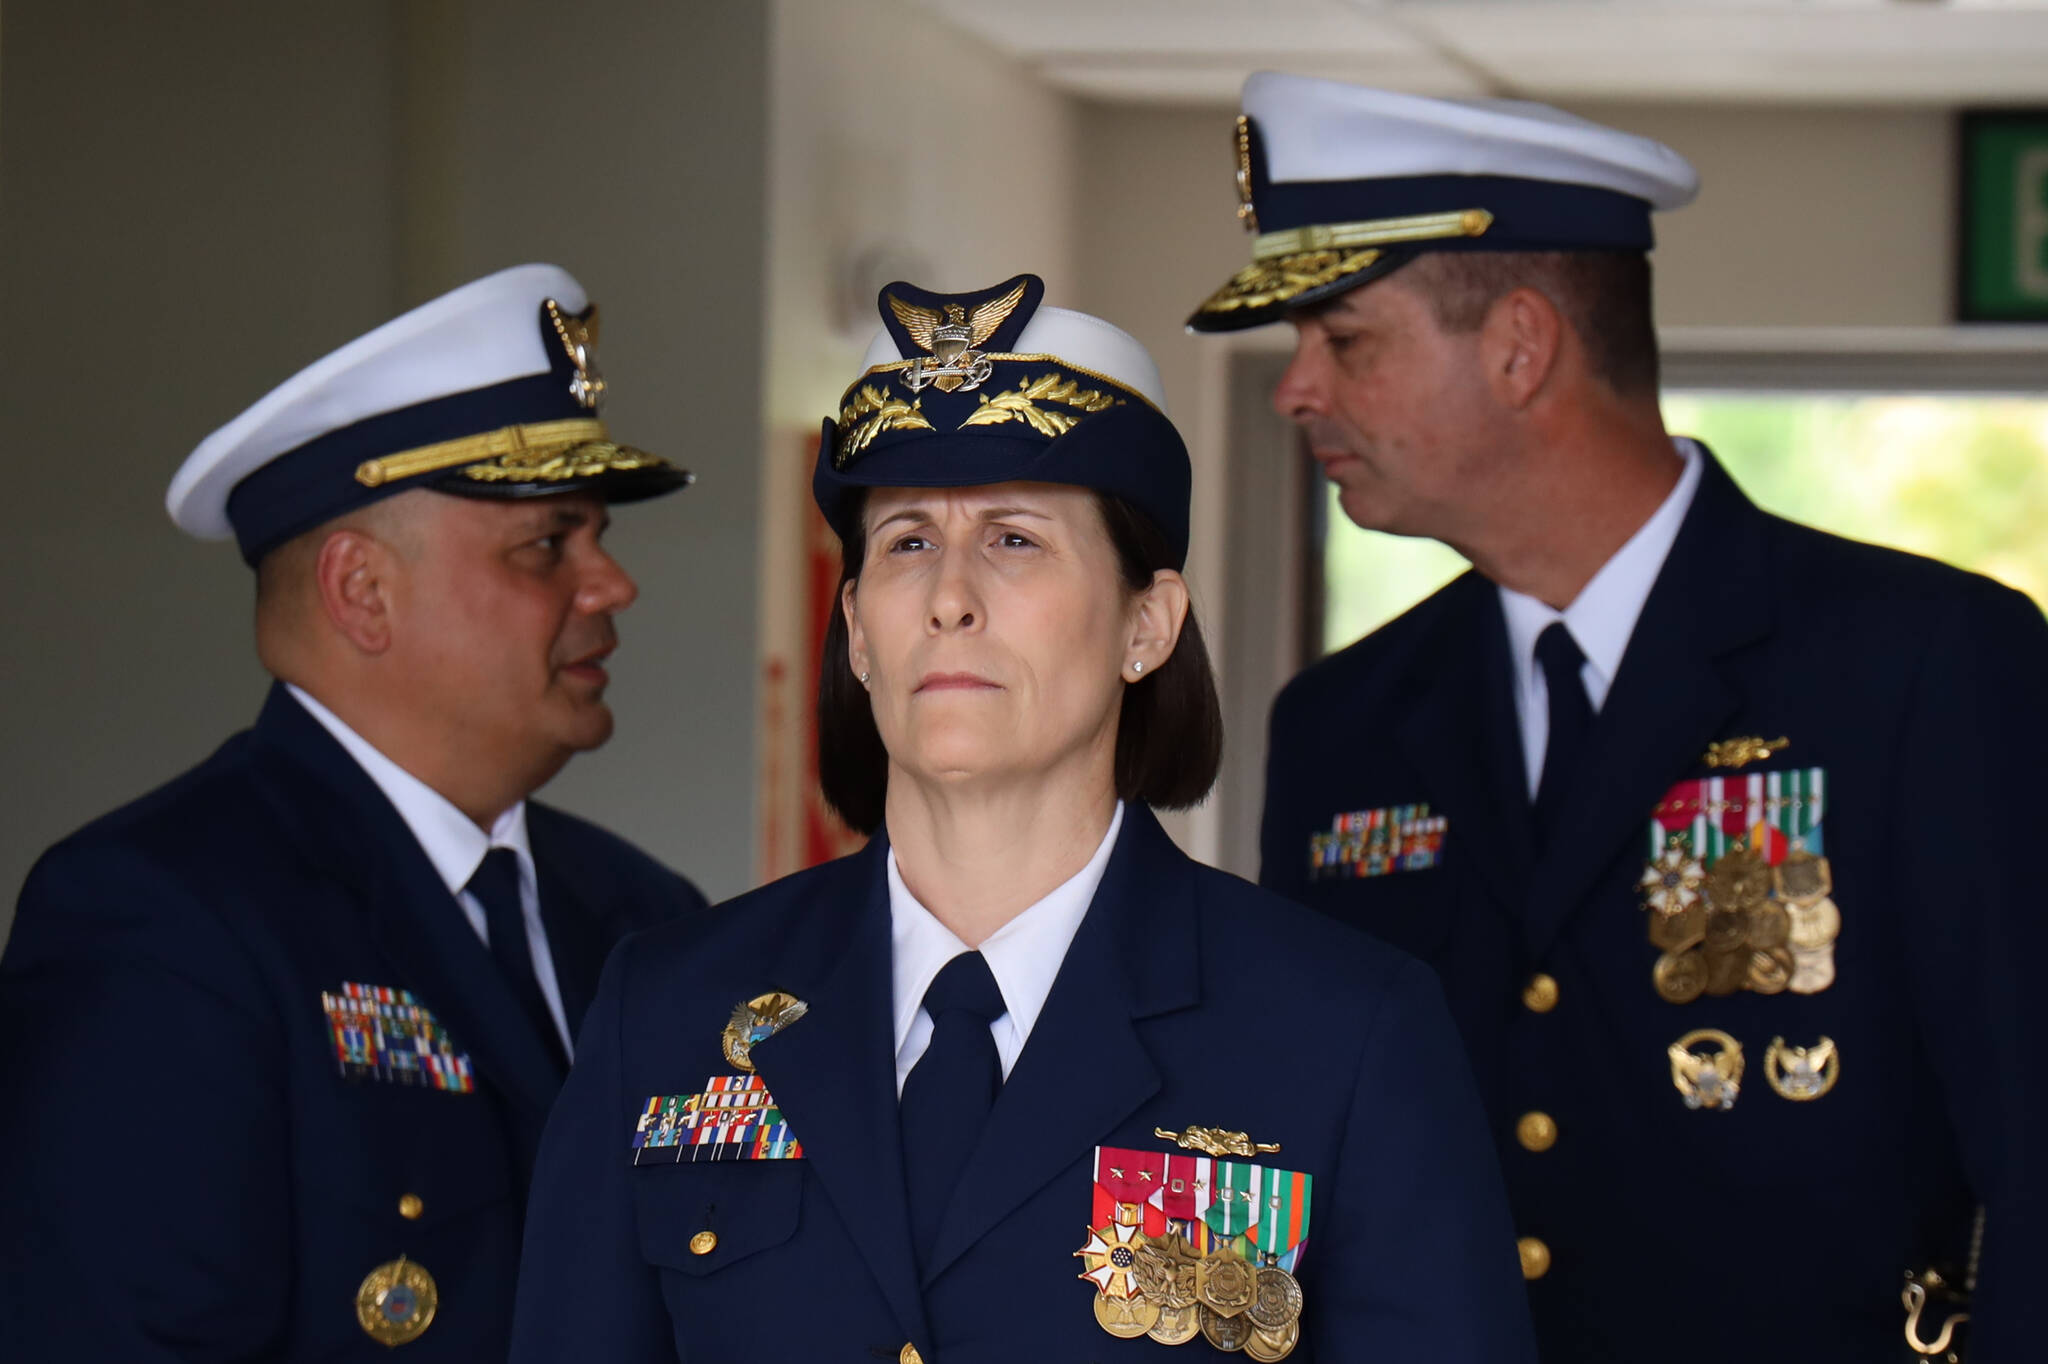 Rear Adm. Megan M. Dean (center) awaits her entrance during a change-of-command Friday in Juneau where she was sworn as the new command of U.S. Coast Guard District 17 at the Alaska Army National Guard Aviation Operating Facility in Juneau. Standing behind to her left is Vice Adm. Andrew J. Tiongson and to her right is outgoing Rear Adm. Nathan A. Moore. (Clarise Larson / Juneau Empire)